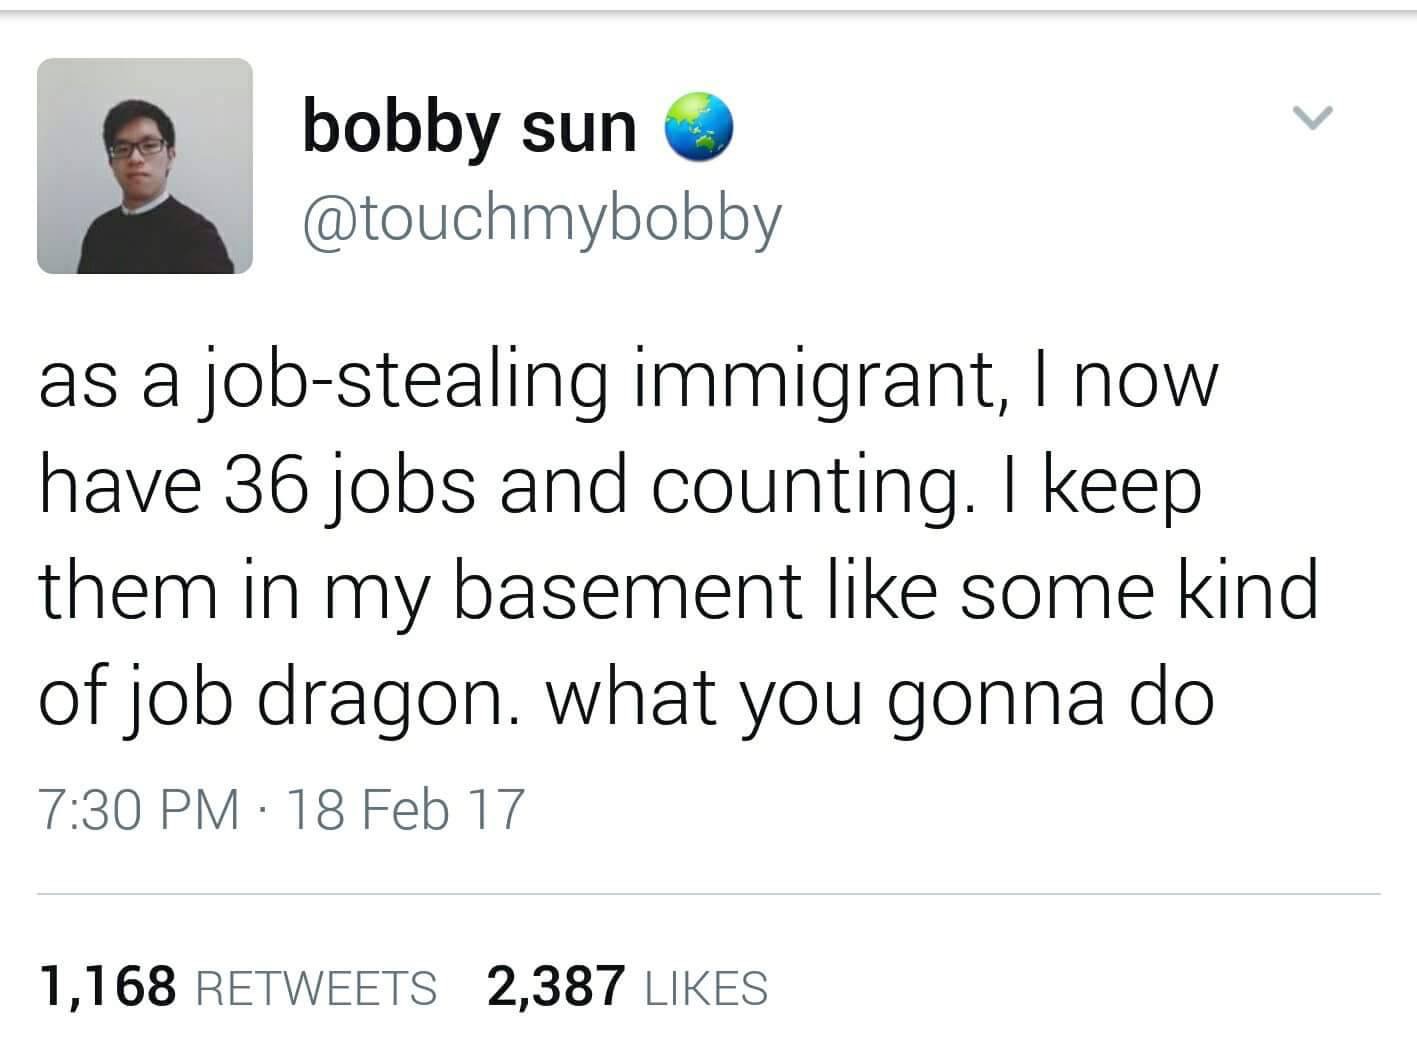 organization - bobby sun as a jobstealing immigrant, I now have 36 jobs and counting. I keep them in my basement some kind of job dragon. what you gonna do 18 Feb 17 1,168 2,387